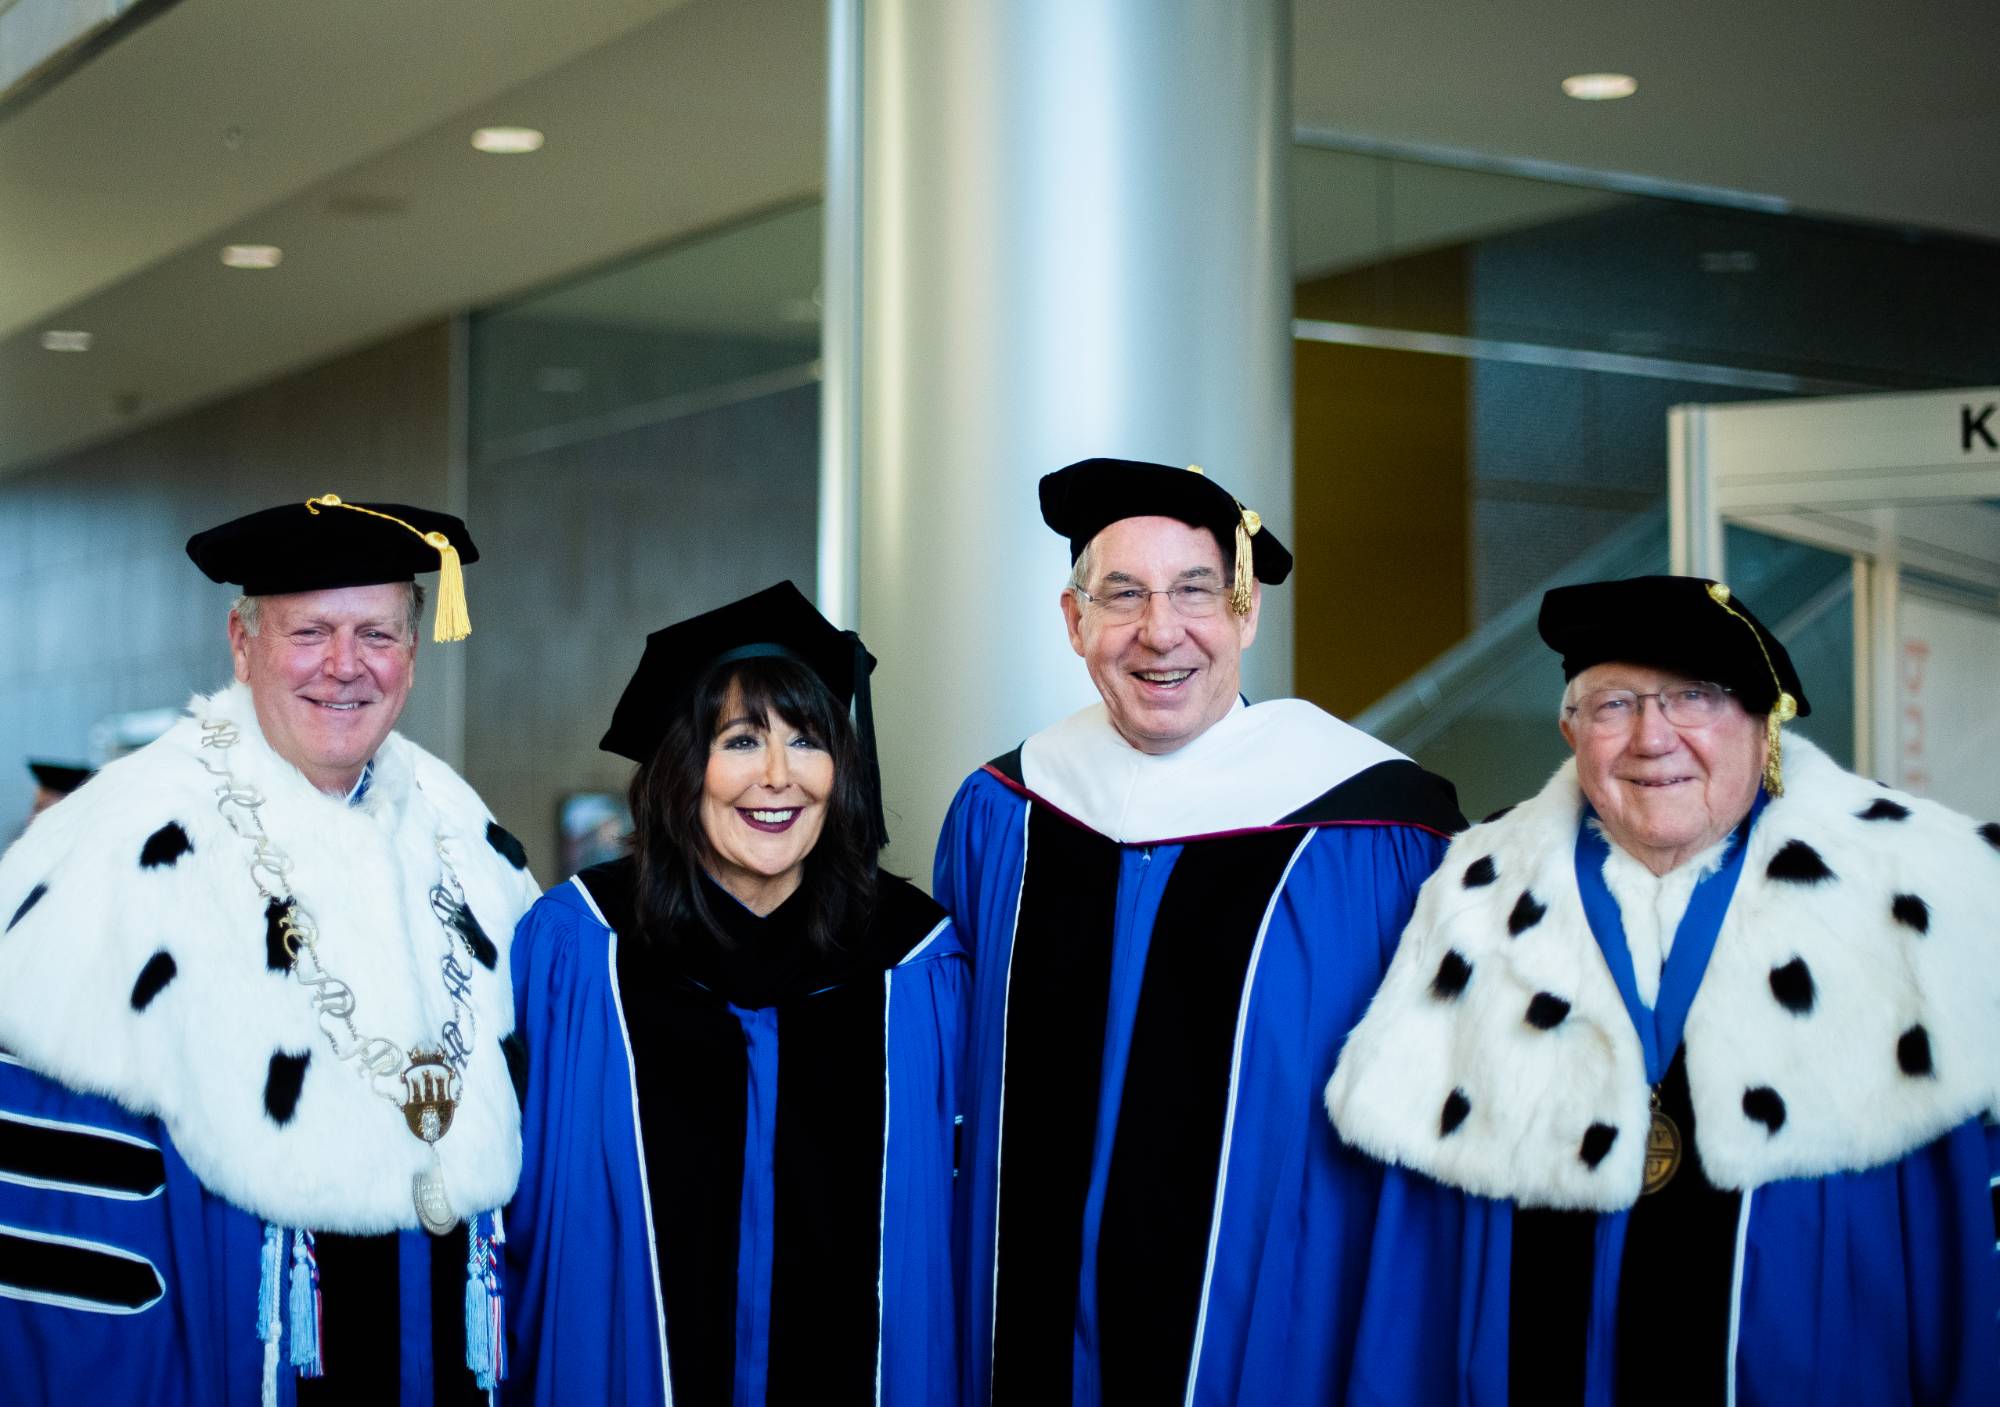 Past 4 Presidents: Mantella, Hass, Kelly, Lubbers